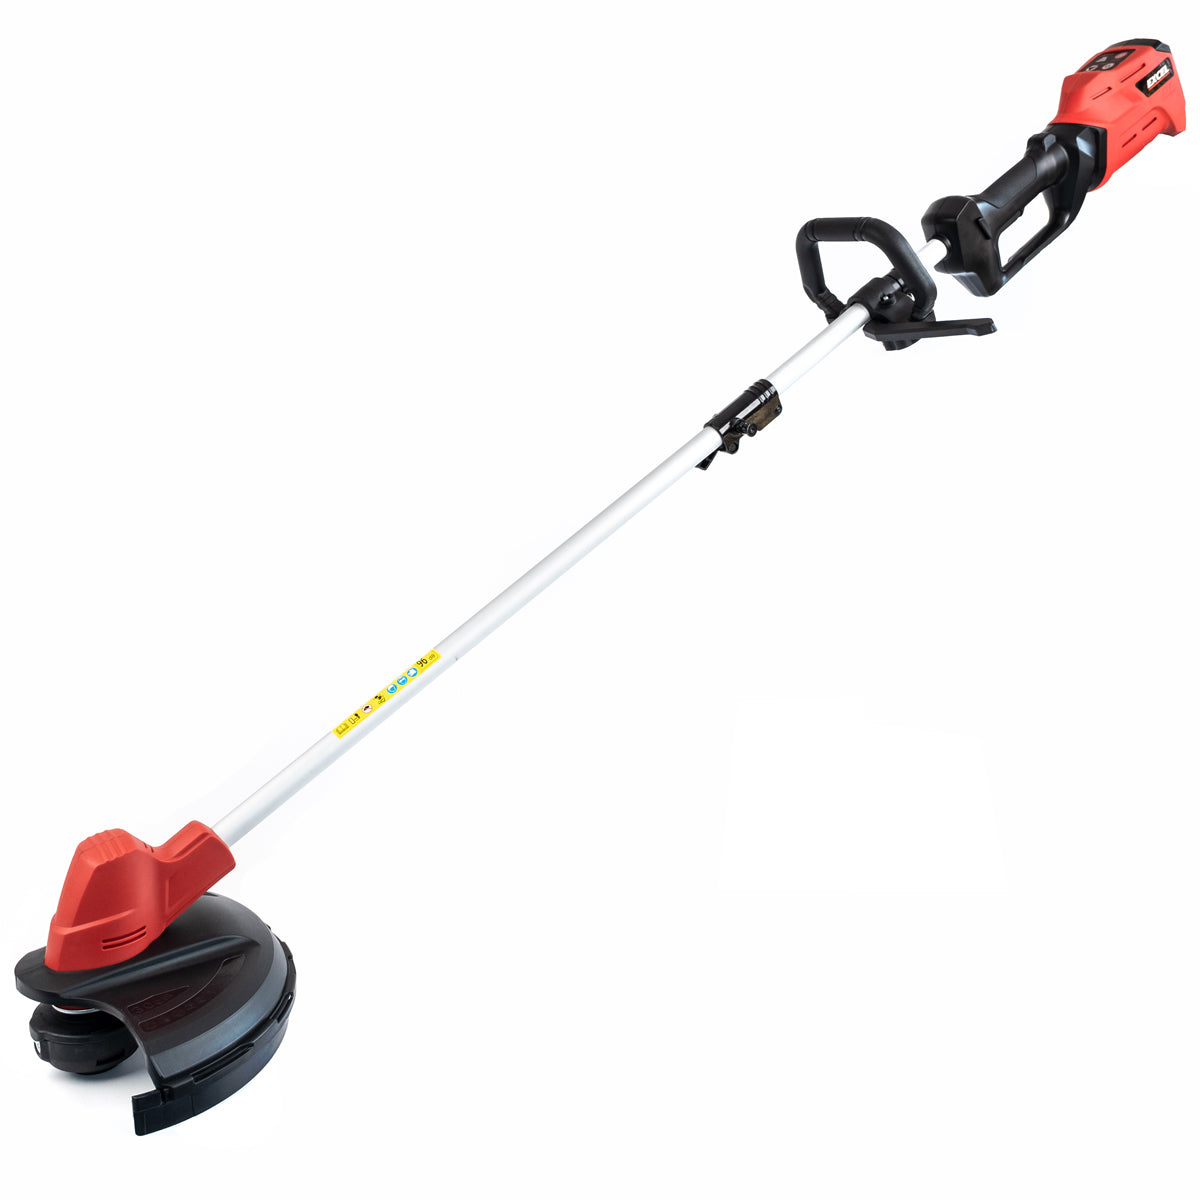 Excel 18V Brushless Grass Trimmer & Brush Cutter 2 in 1 with 1 x 5.0Ah Battery & Charger